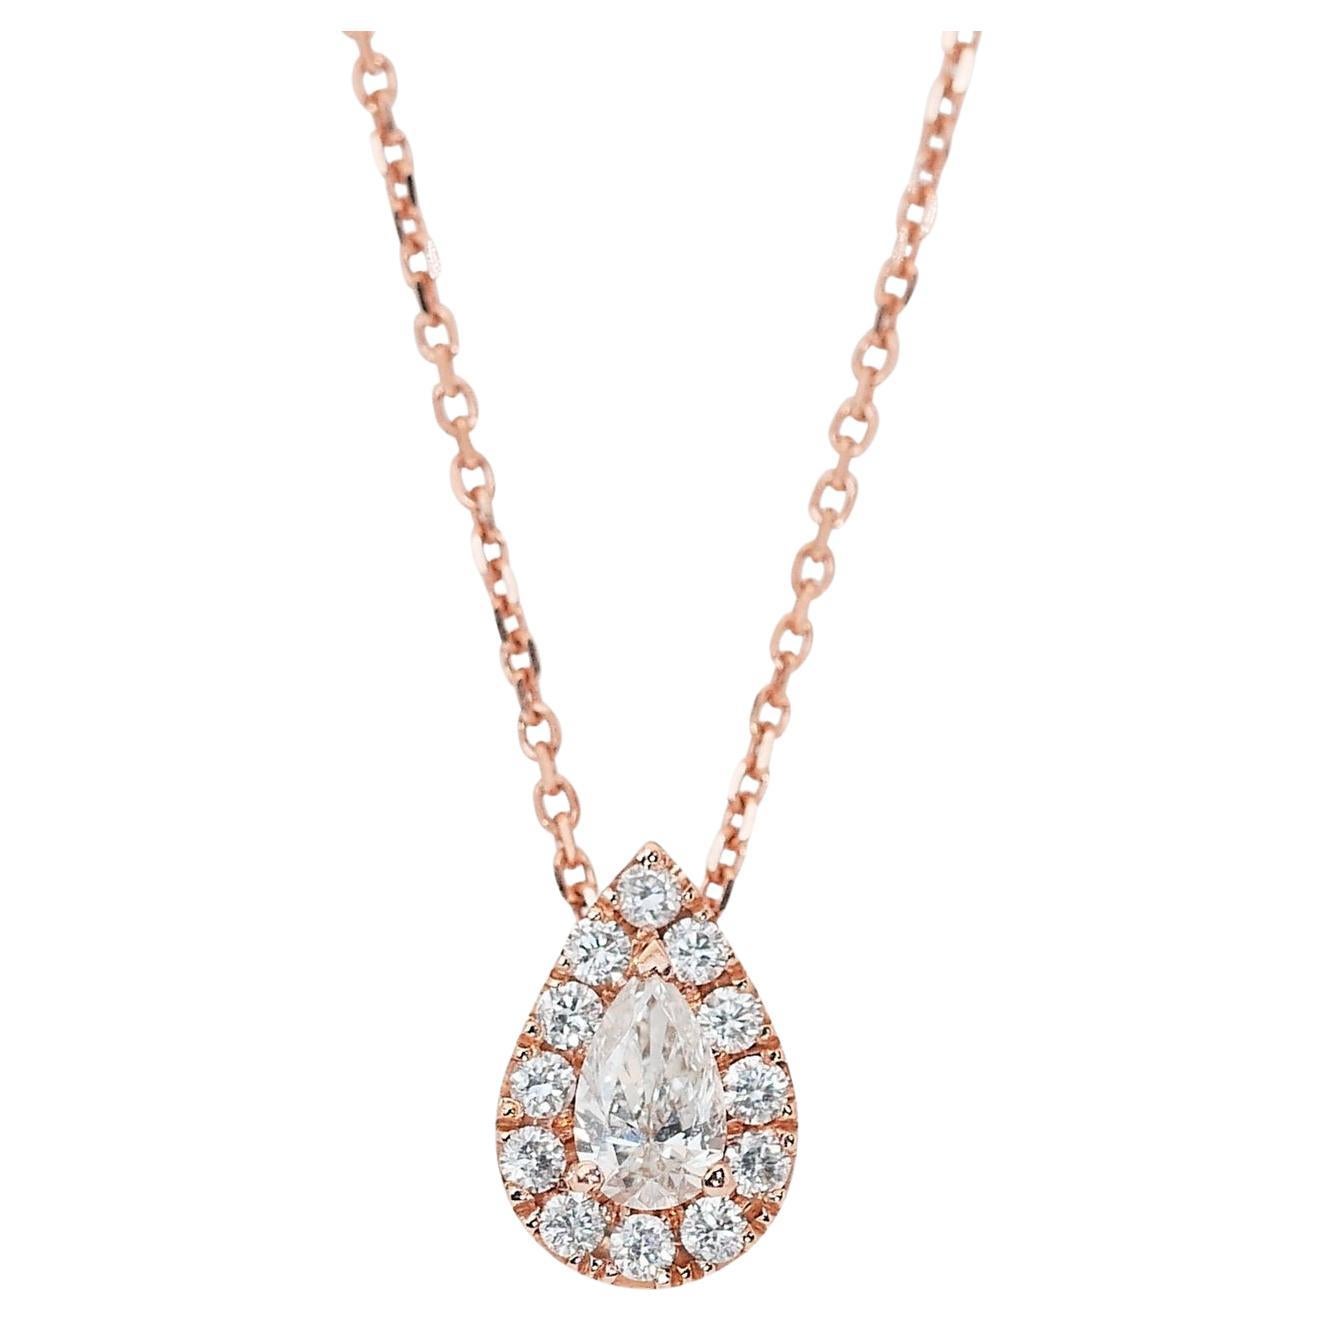 Beautiful 0.63ct Diamonds Halo Necklace in 18k Rose Gold - GIA Certified